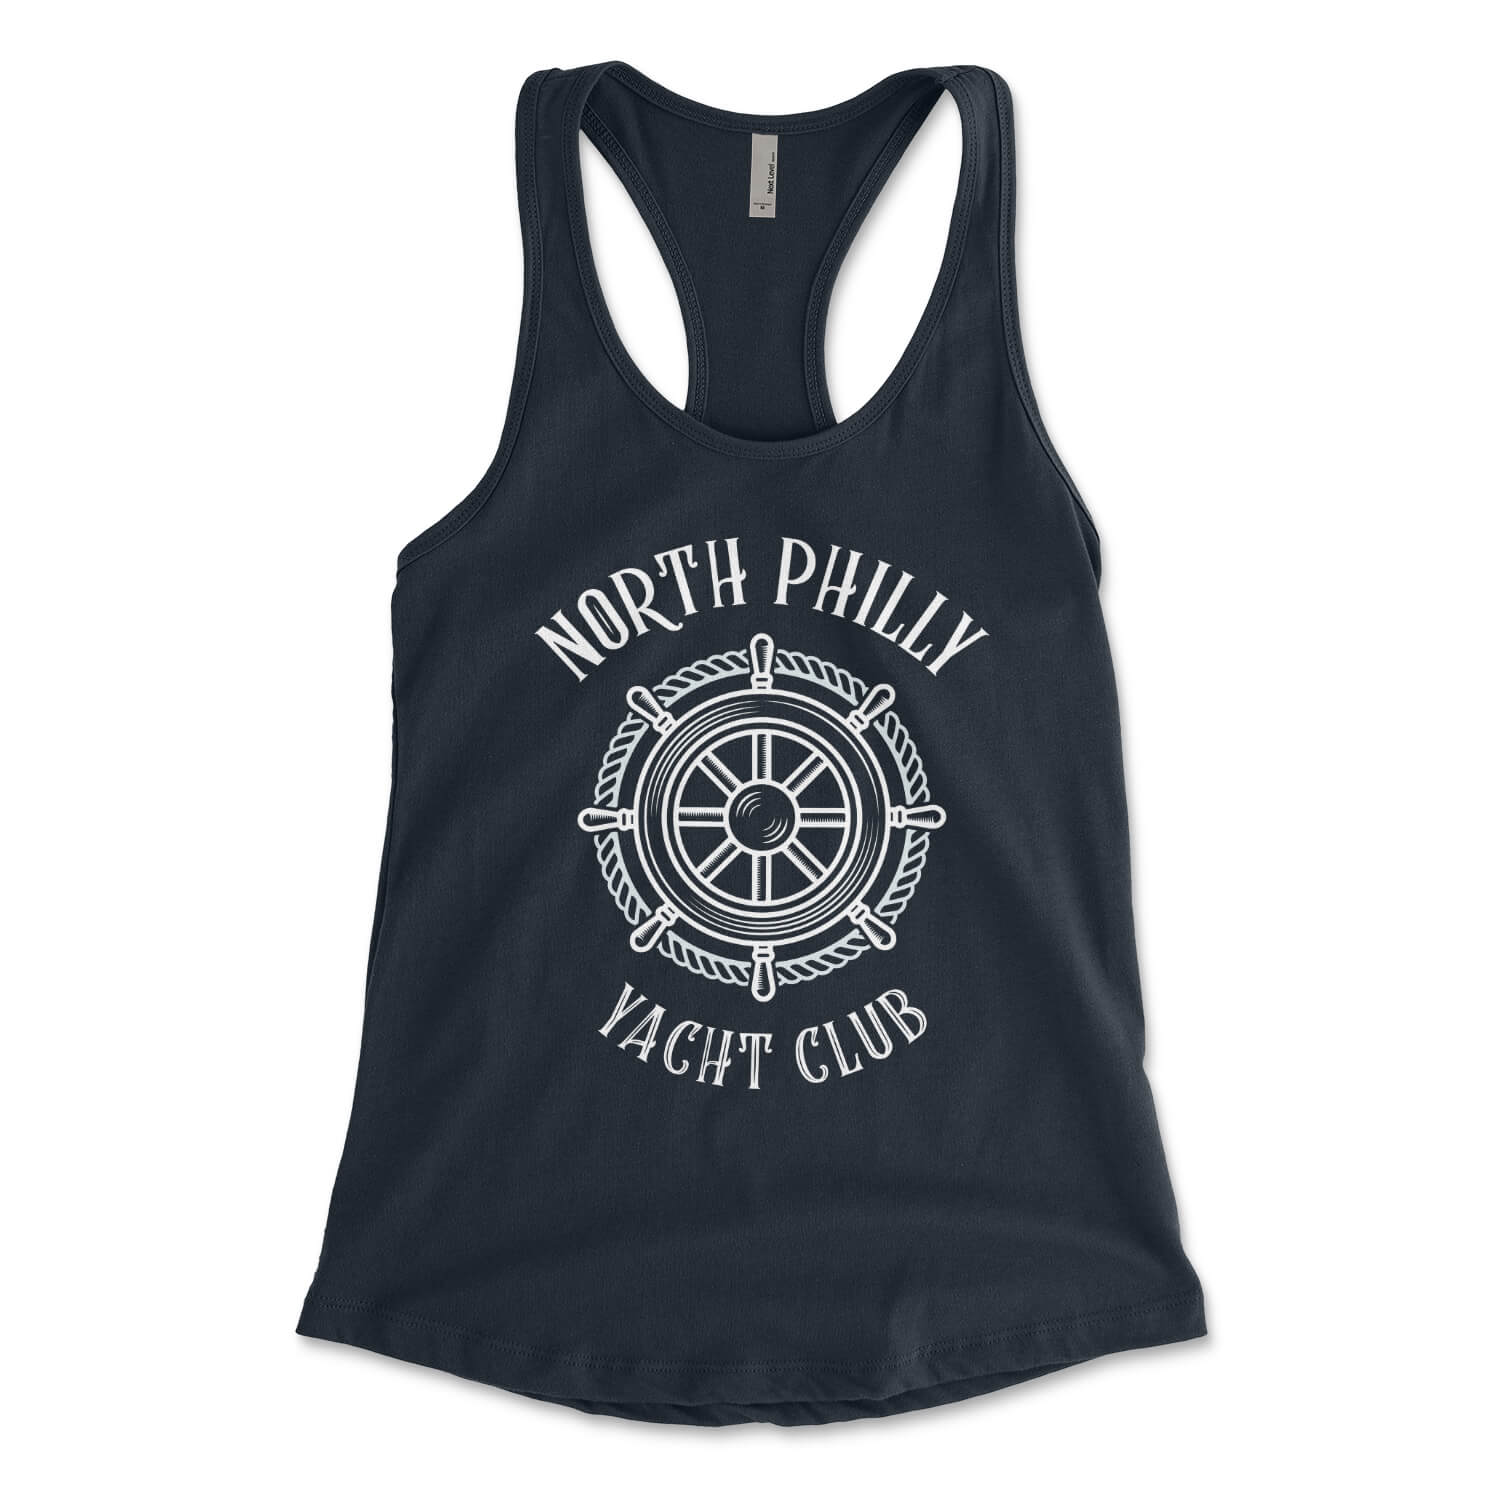 North Philly Yacht Club midnight navy blue womens racerback tank top from Phillygoat